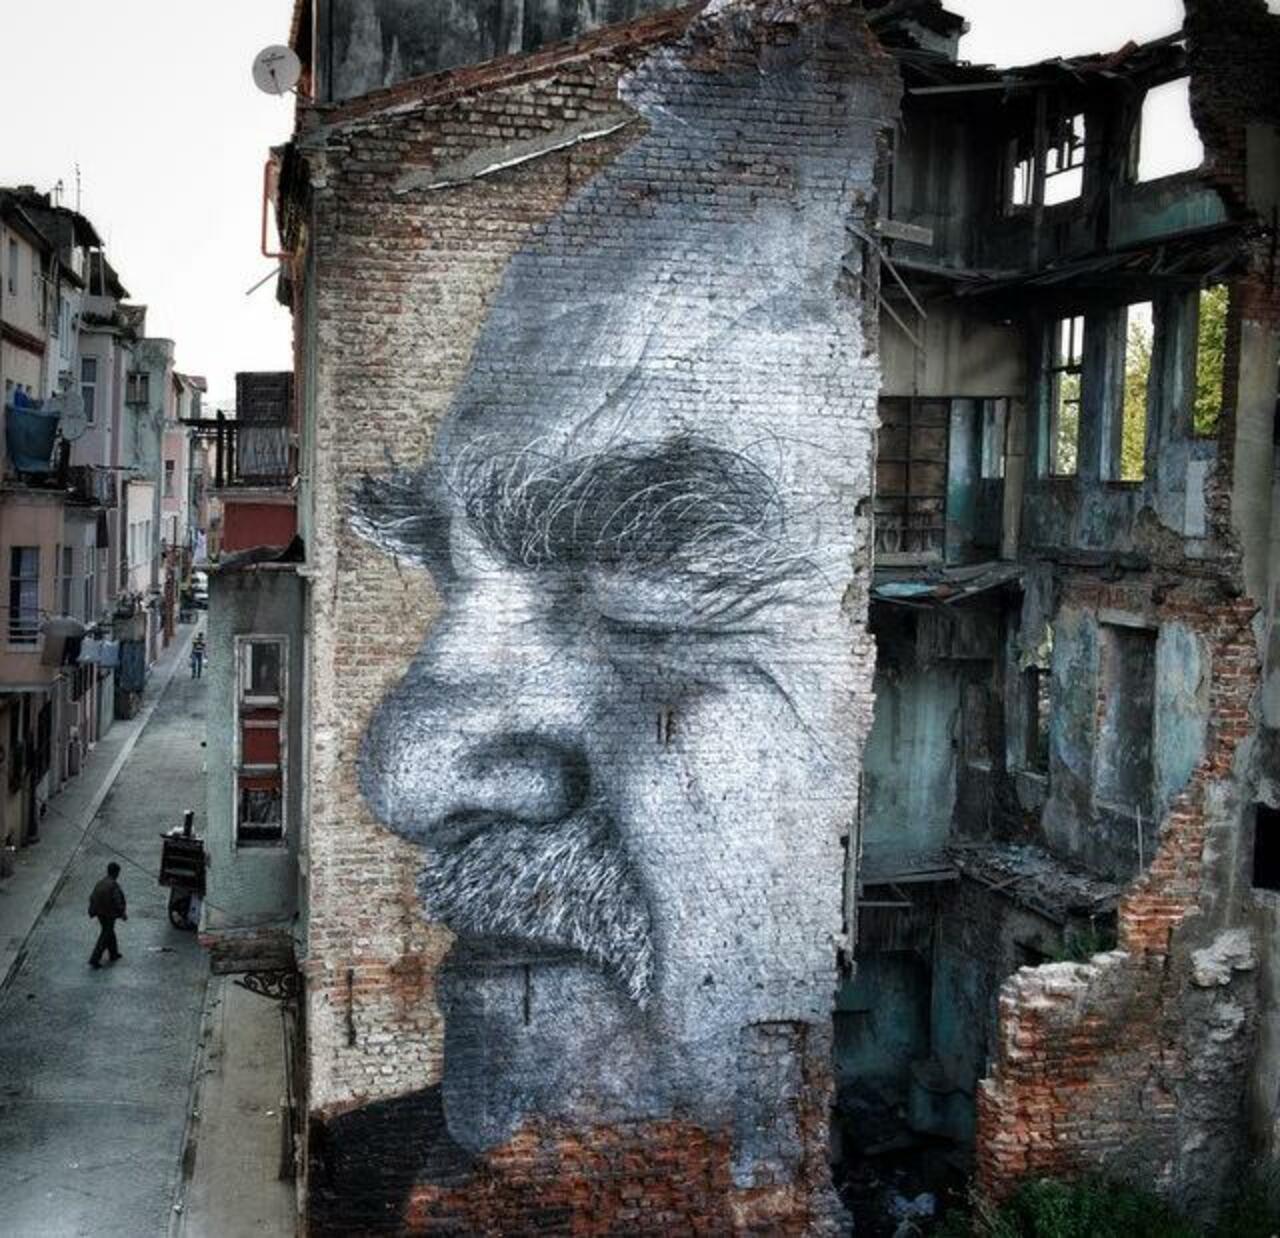 Street Art by JR in Istanbul & after local police painted over it 

#art #arte #graffiti #streetart http://t.co/YWF09MrZlA